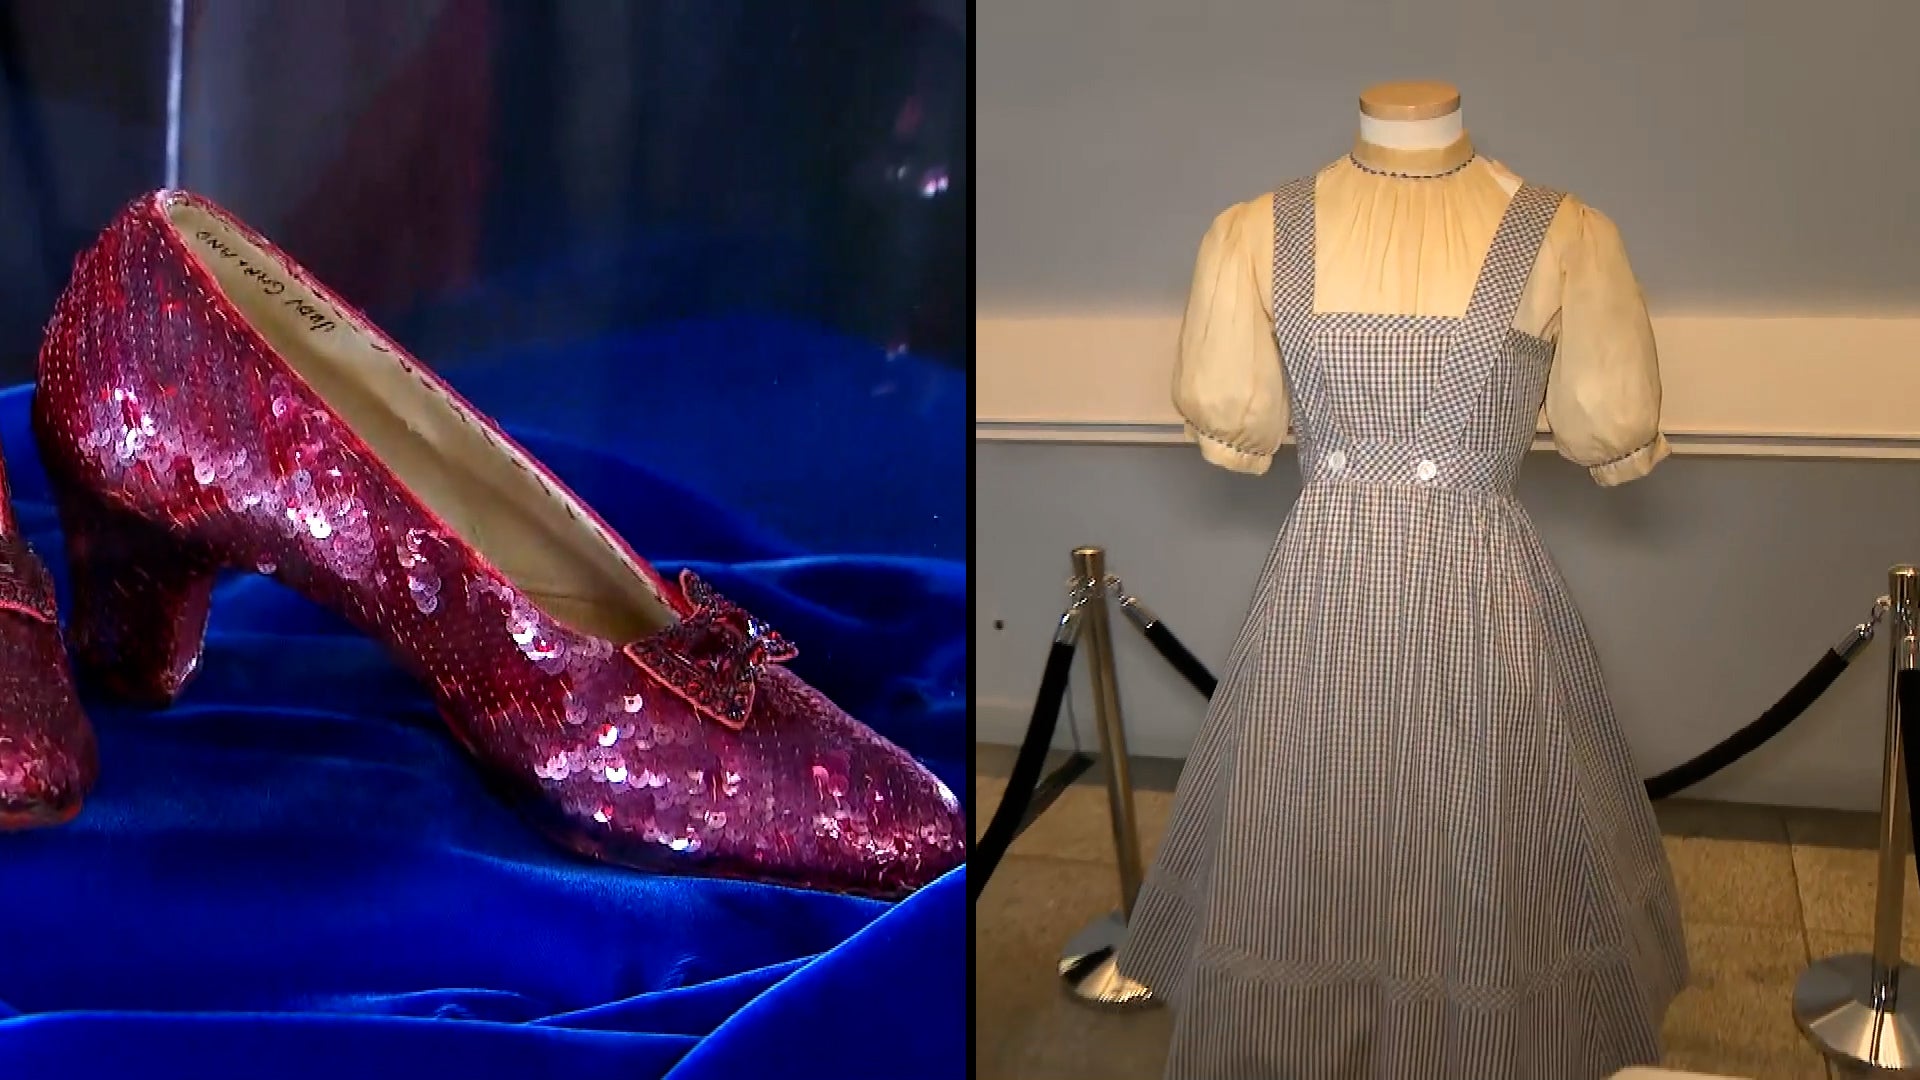 The Wizard of Oz: Dorothy Ruby Slippers Replica Display Model | HLJ.com